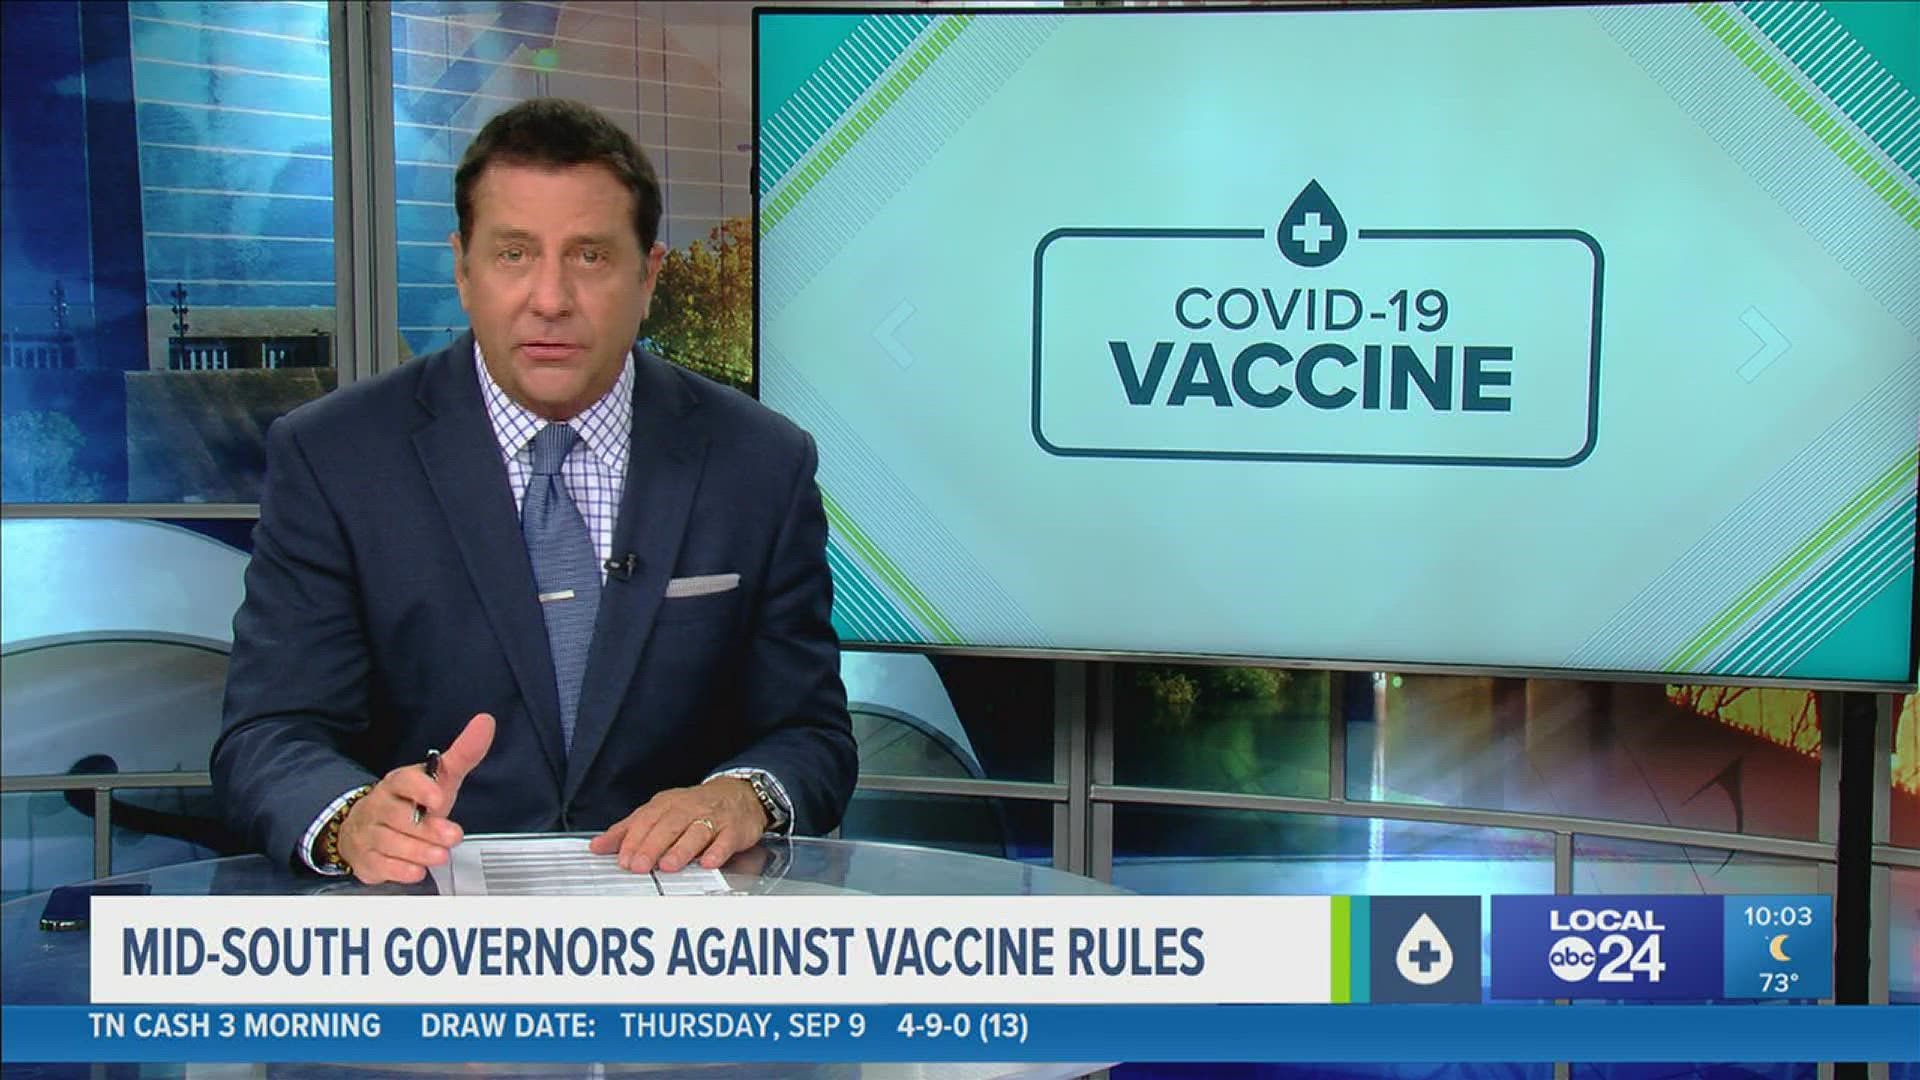 Governors Hutchinson, Reeves, and Lee react to a plan for all employers with more than 100 workers to require employees to be vaccinated for COVID-19 or test for the